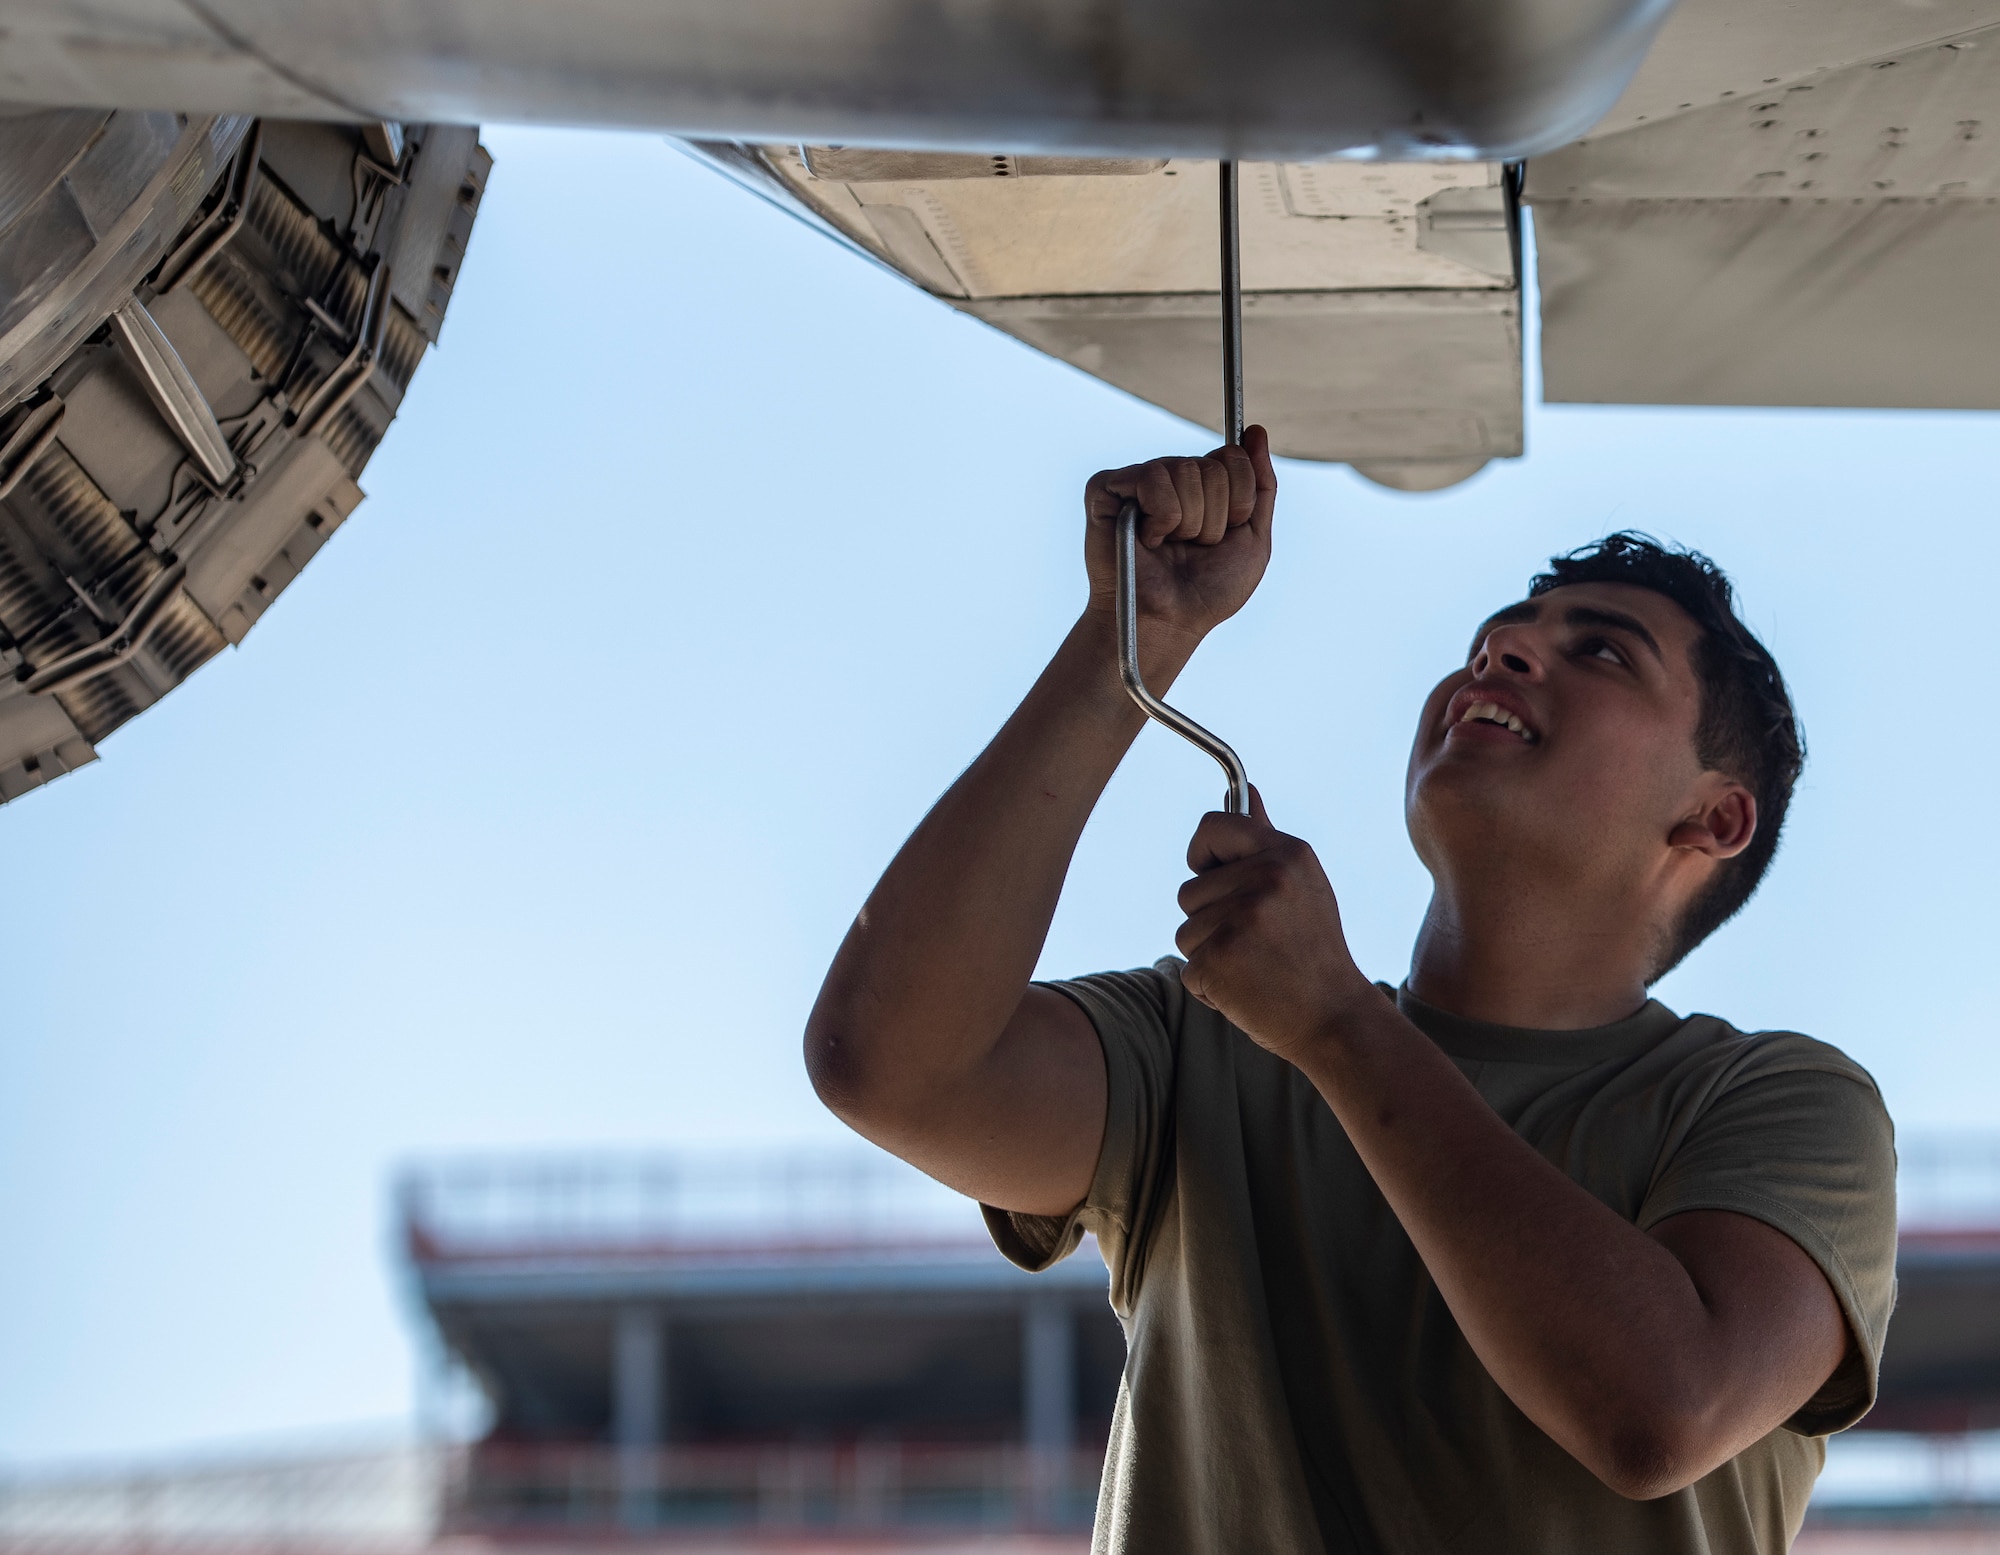 U.S. Air Force Senior Airman Darryon Rivera, 494th Aircraft Maintenance Unit crew chief, performs routine maintenance on an F-15E Strike Eagle at Royal Air Force Lakenheath, England, Aug 7, 2020. 48th AMXS Airmen ensure Liberty Wing F-15s are fit to fly and can continue to provide superior airpower capabilities when called upon. (U.S. Air Force photo by Airman 1st Class Jessi Monte)